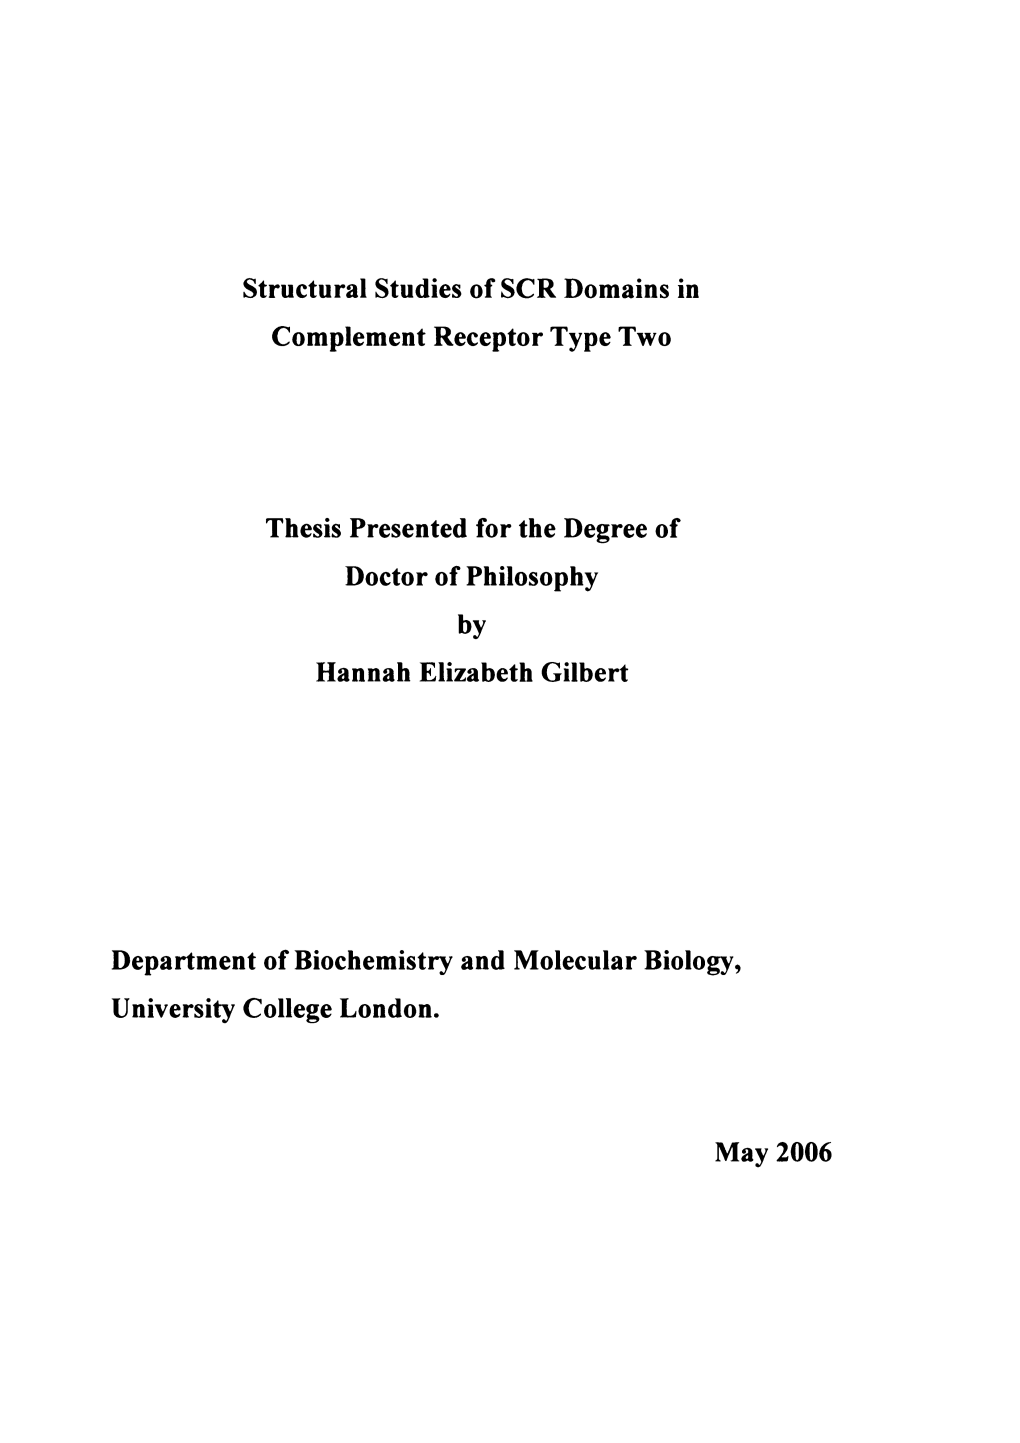 Structural Studies of SCR Domains in Complement Receptor Type Two Thesis Presented for the Degree of Doctor of Philosophy By